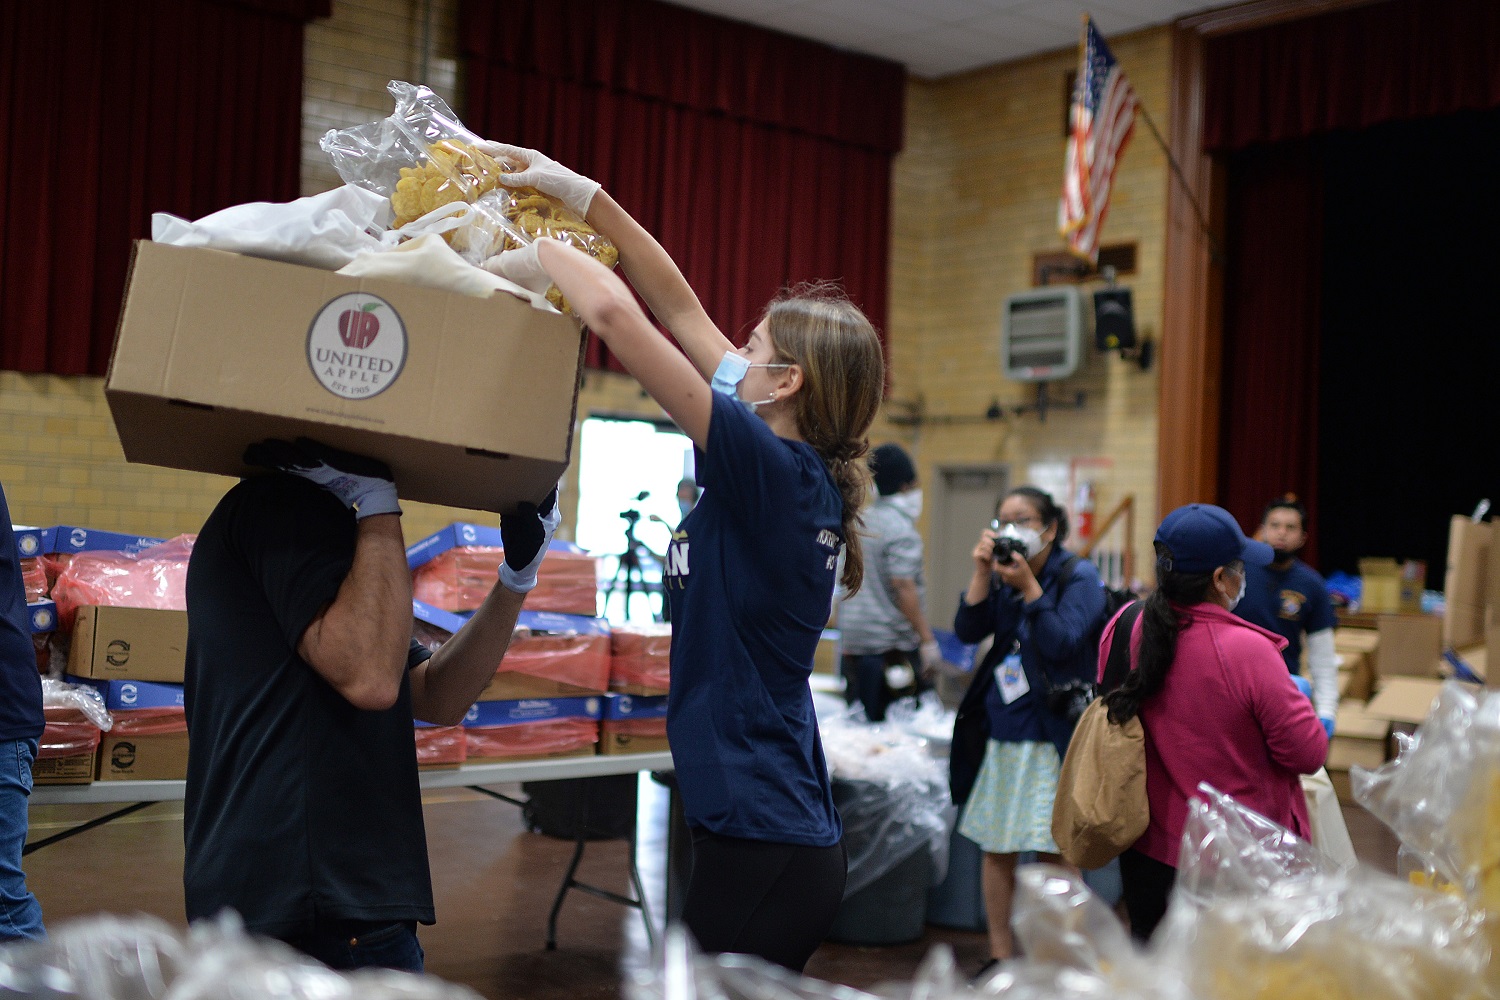 Wearing protective masks and gloves in the time of COVID-19, volunteers help prepare and distribute donated food to people seeking assistance at St. Finbar Catholic Church, in the Brooklyn borough of New York, NY, May 29, 2020. With enough food packages for 1500 individuals, Catholic Charities Brooklyn and Queens distributed food to those suffering from food insecurities caused by the impact of the Coronavirus pandemic and Its effect on the economy. (Anthony Behar/Sipa USA)No Use UK. No Use Germany.